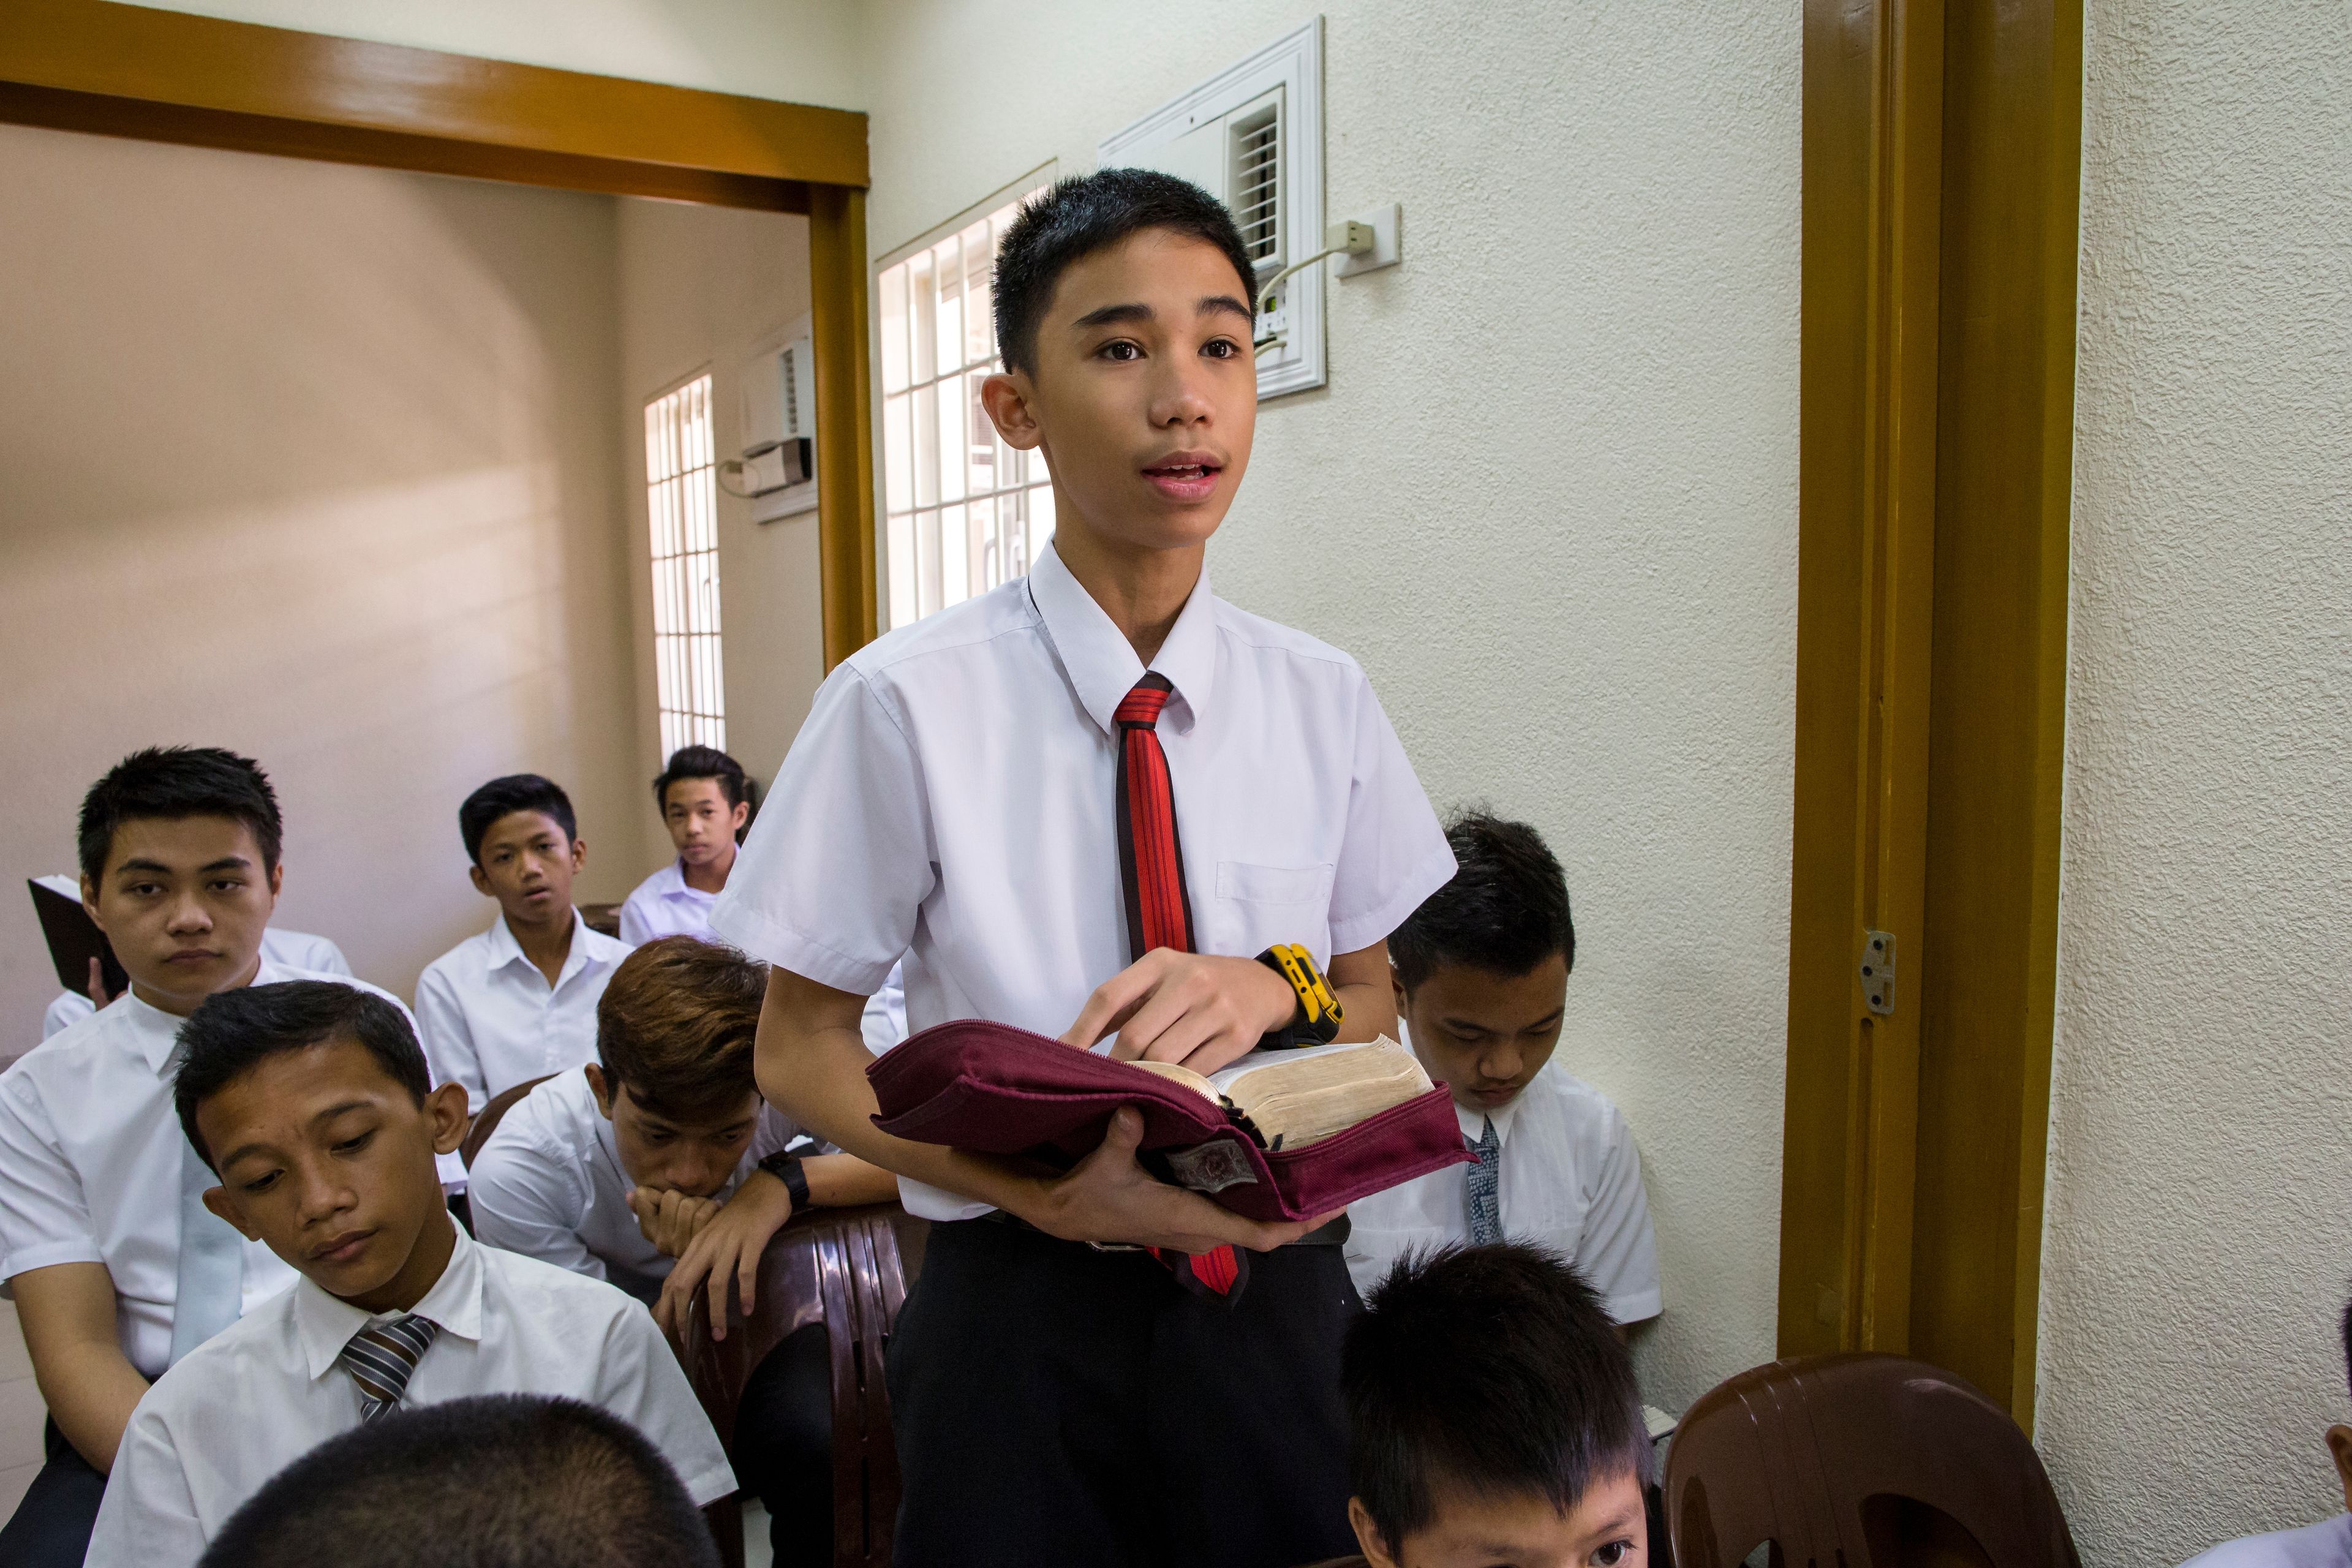 A young man stands up during priesthood meeting and reads from his scriptures.  